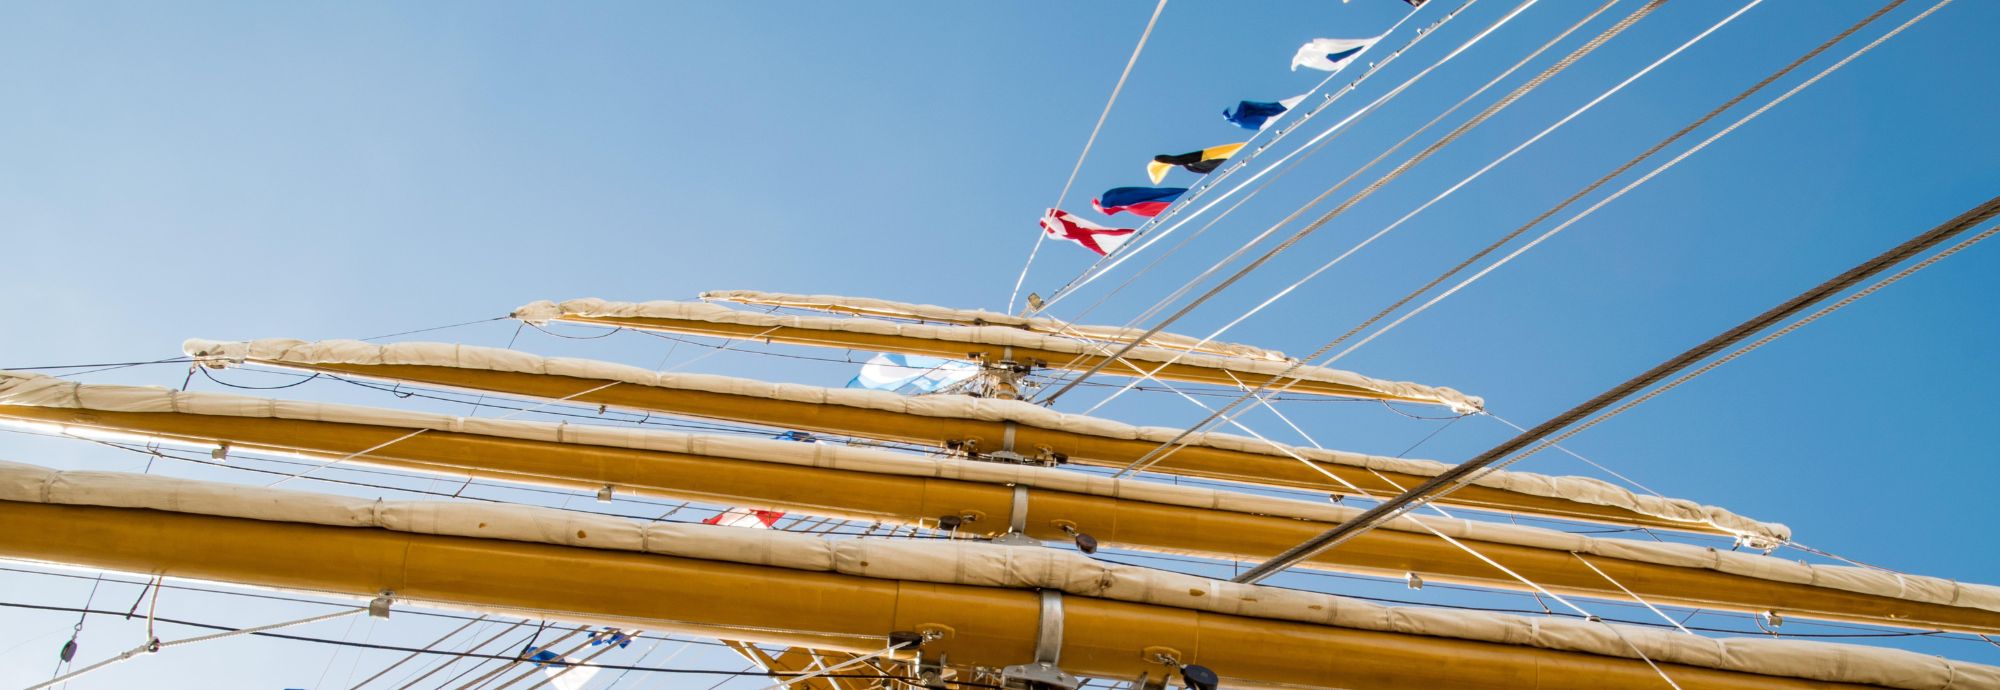 A tall ship's masts with nautical flags flying.